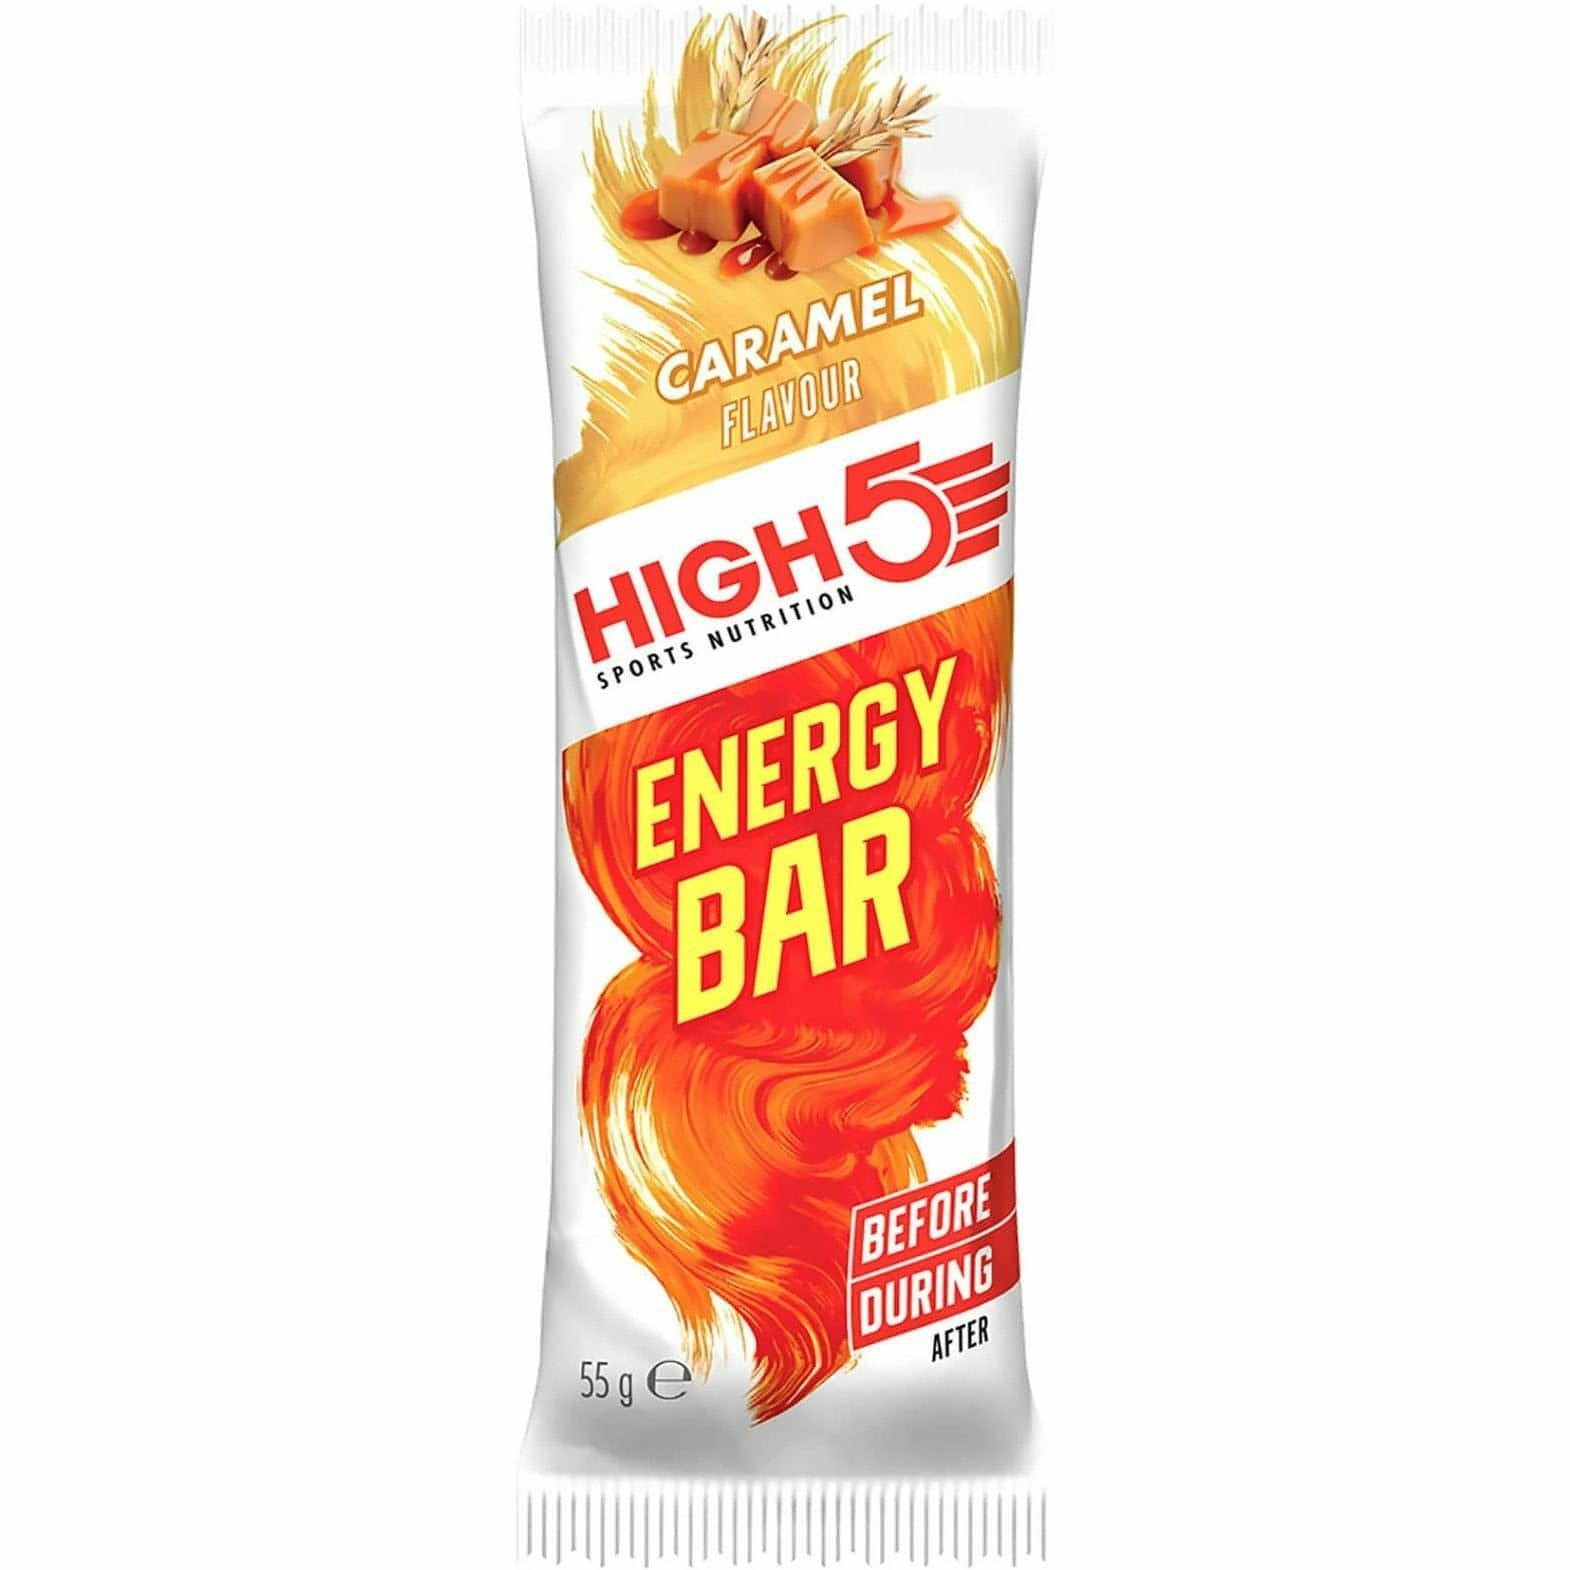 High 5 Sports Nutrition Energy Bar Caramel Flavour 55g RRP 1.25 CLEARANCE XL 89p or 2 for 1.50